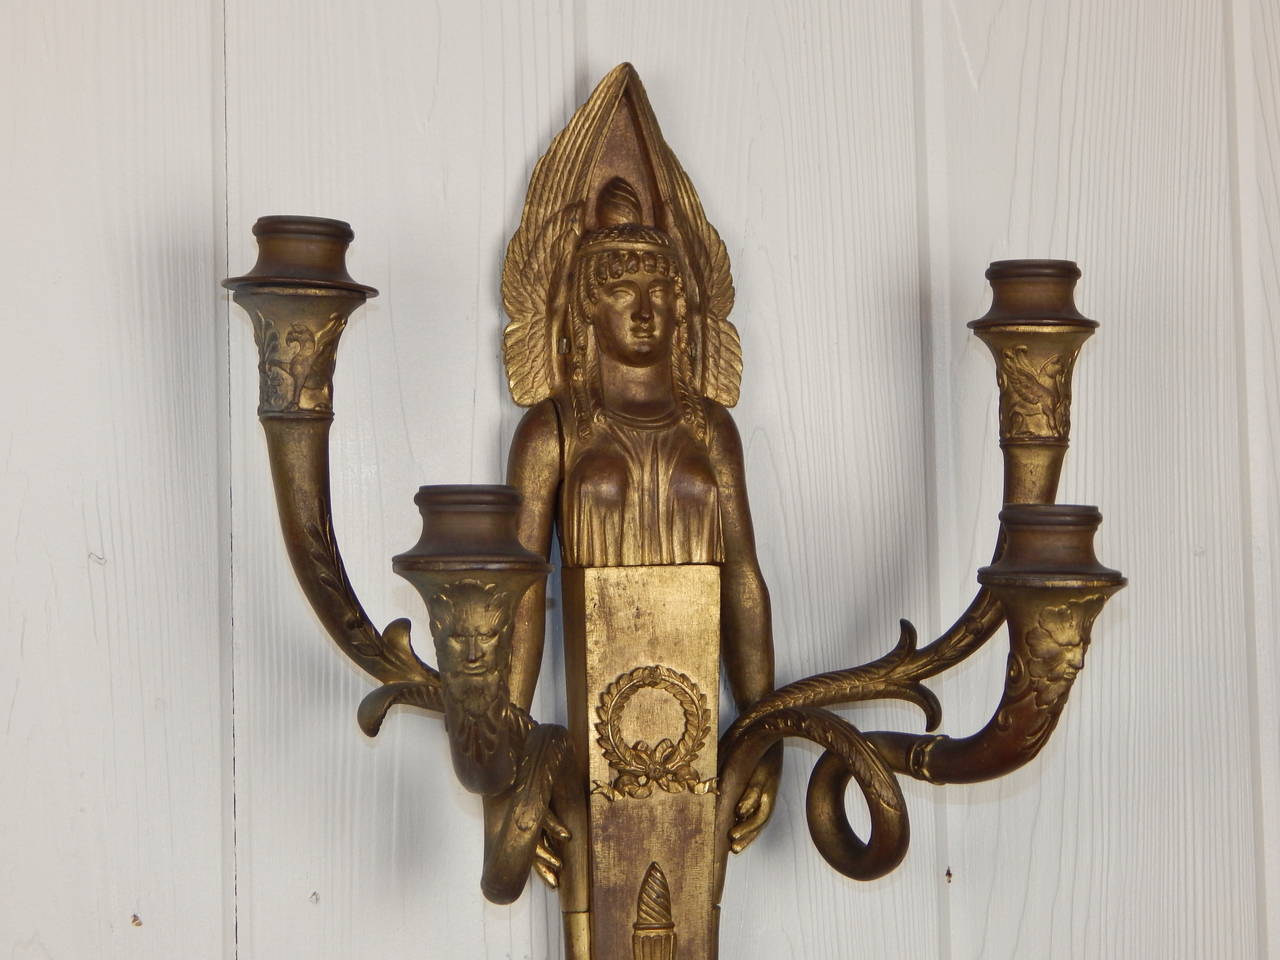 Great pair of Empire Period four light wall sconces. The true Egyptian design of these represent the traditional French Empire style. Design features include a woman at the center with masks and sphinxes on the arms.